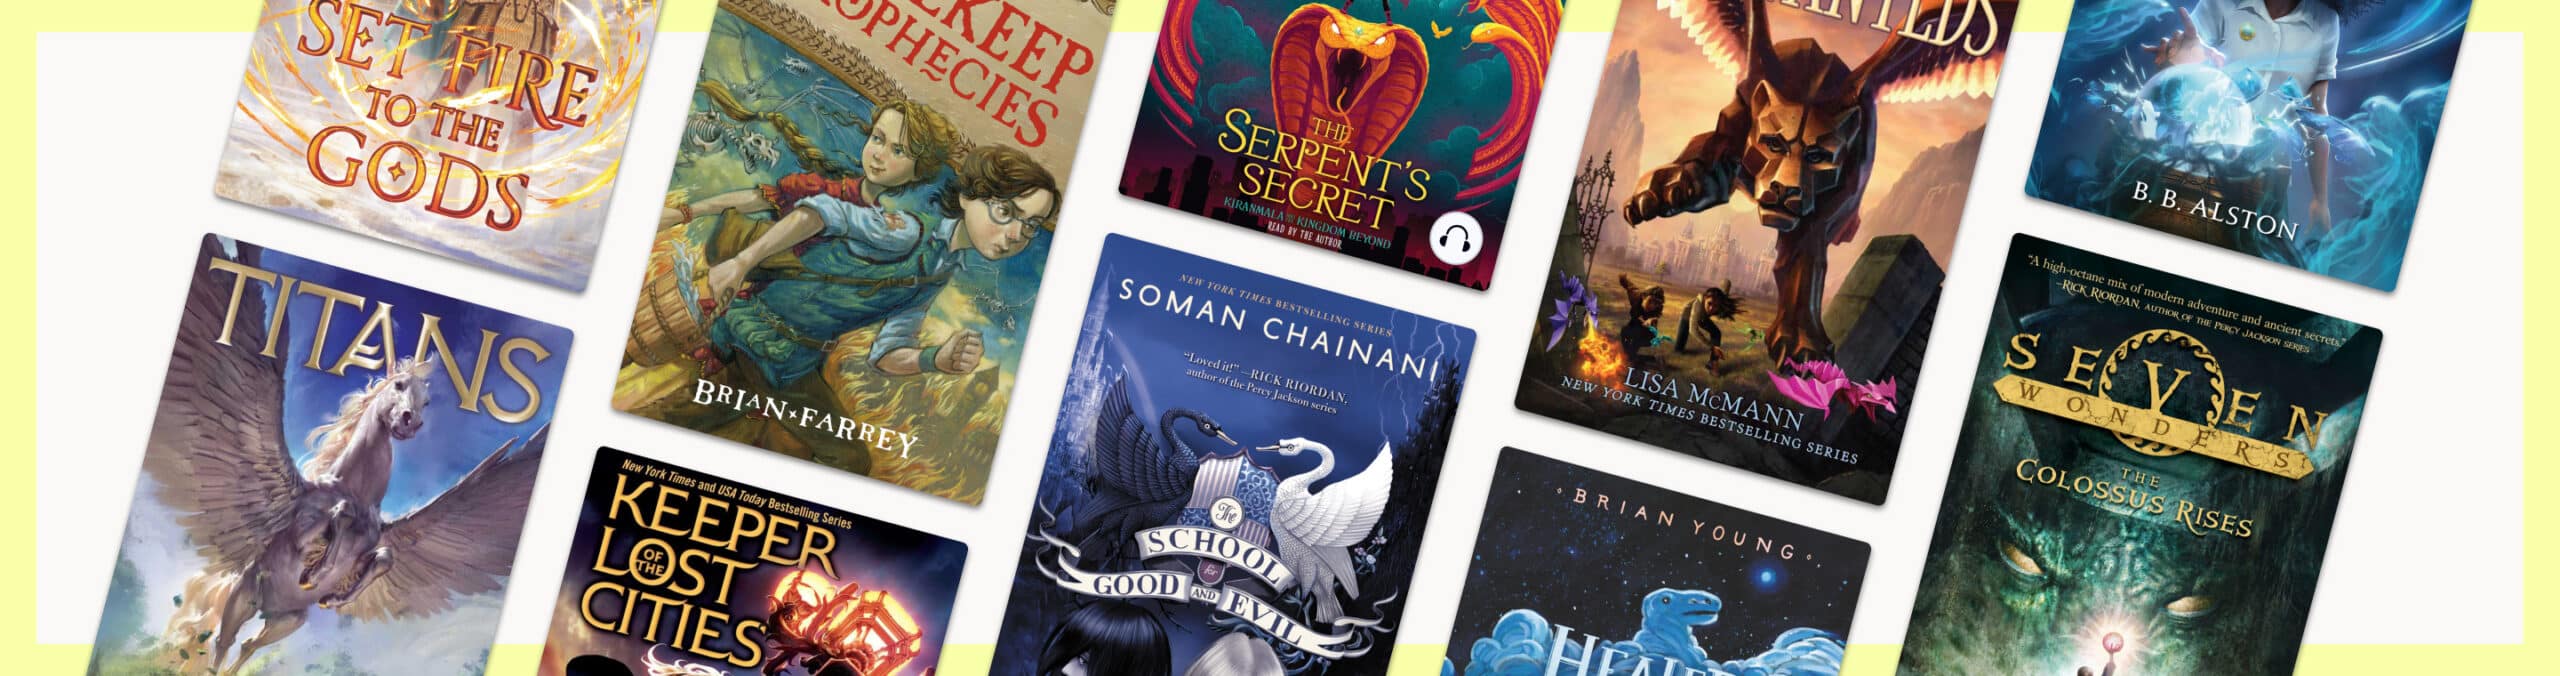 15 books like ‘Percy Jackson’ packed with epic adventure